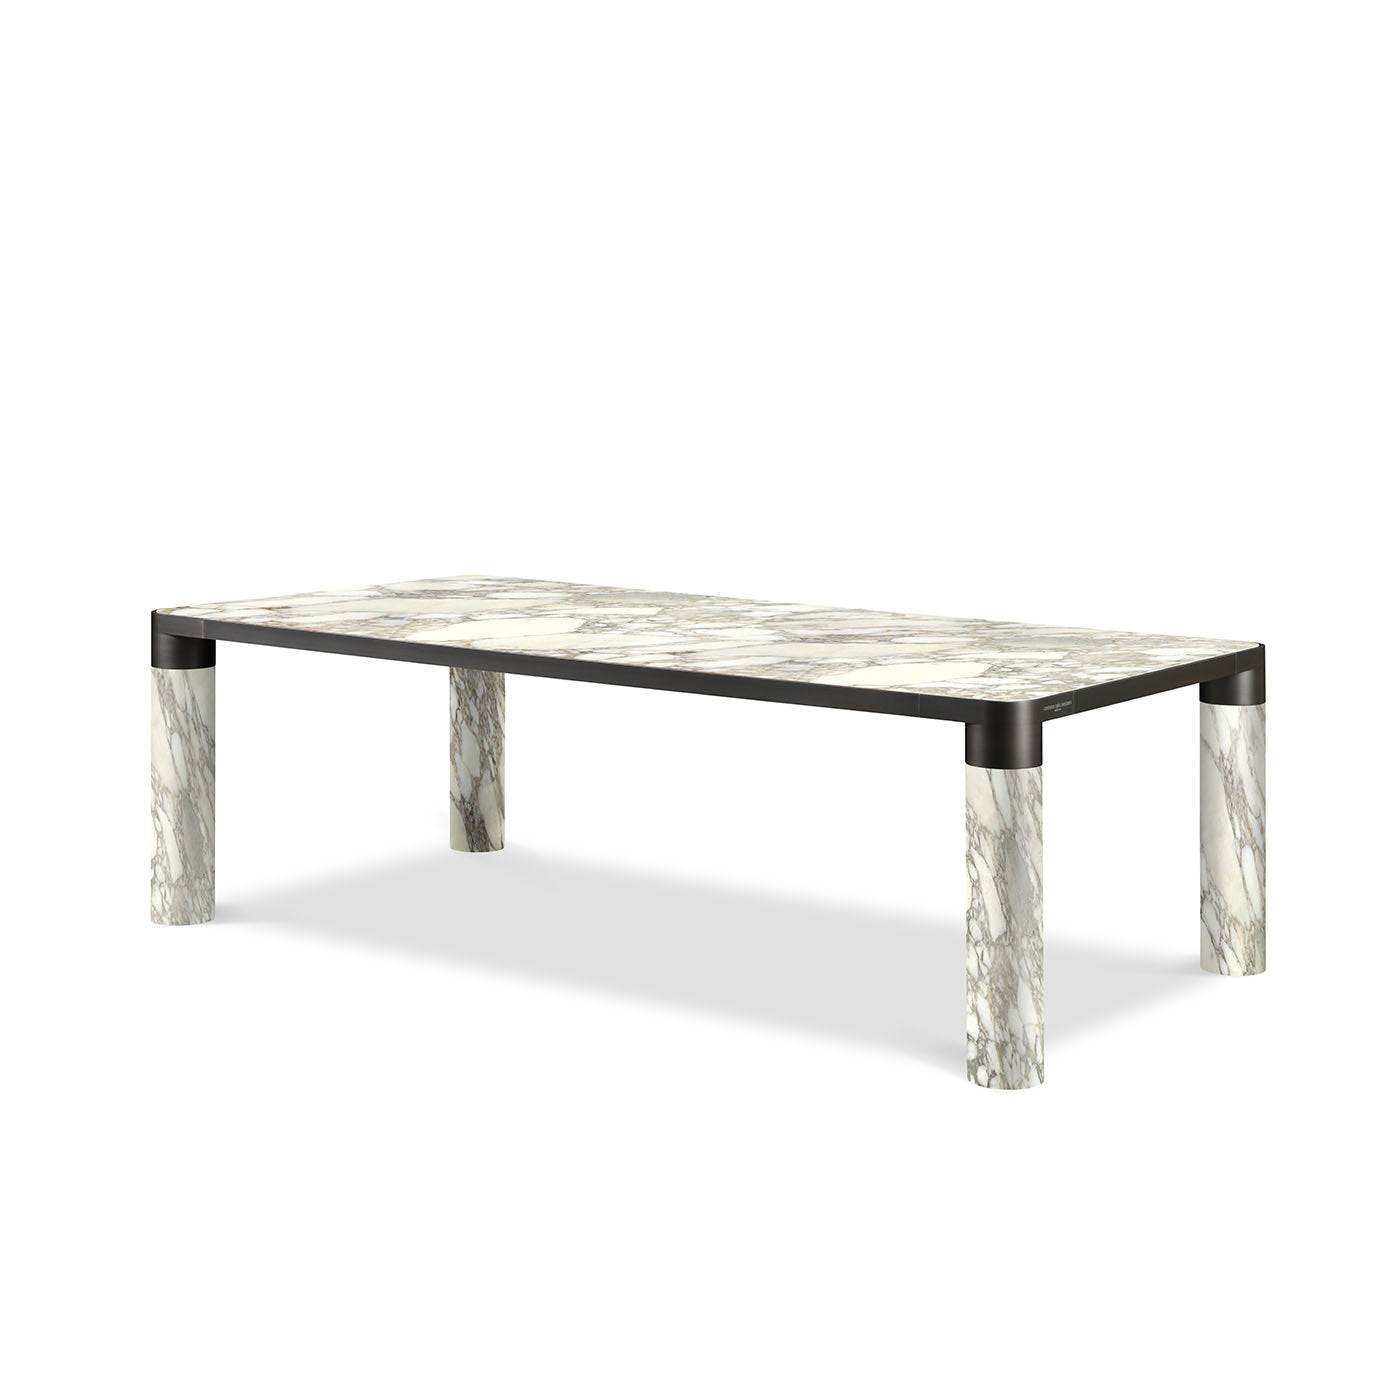 Bold Calacatta Gold Marble Dining Table - Alternative view 1